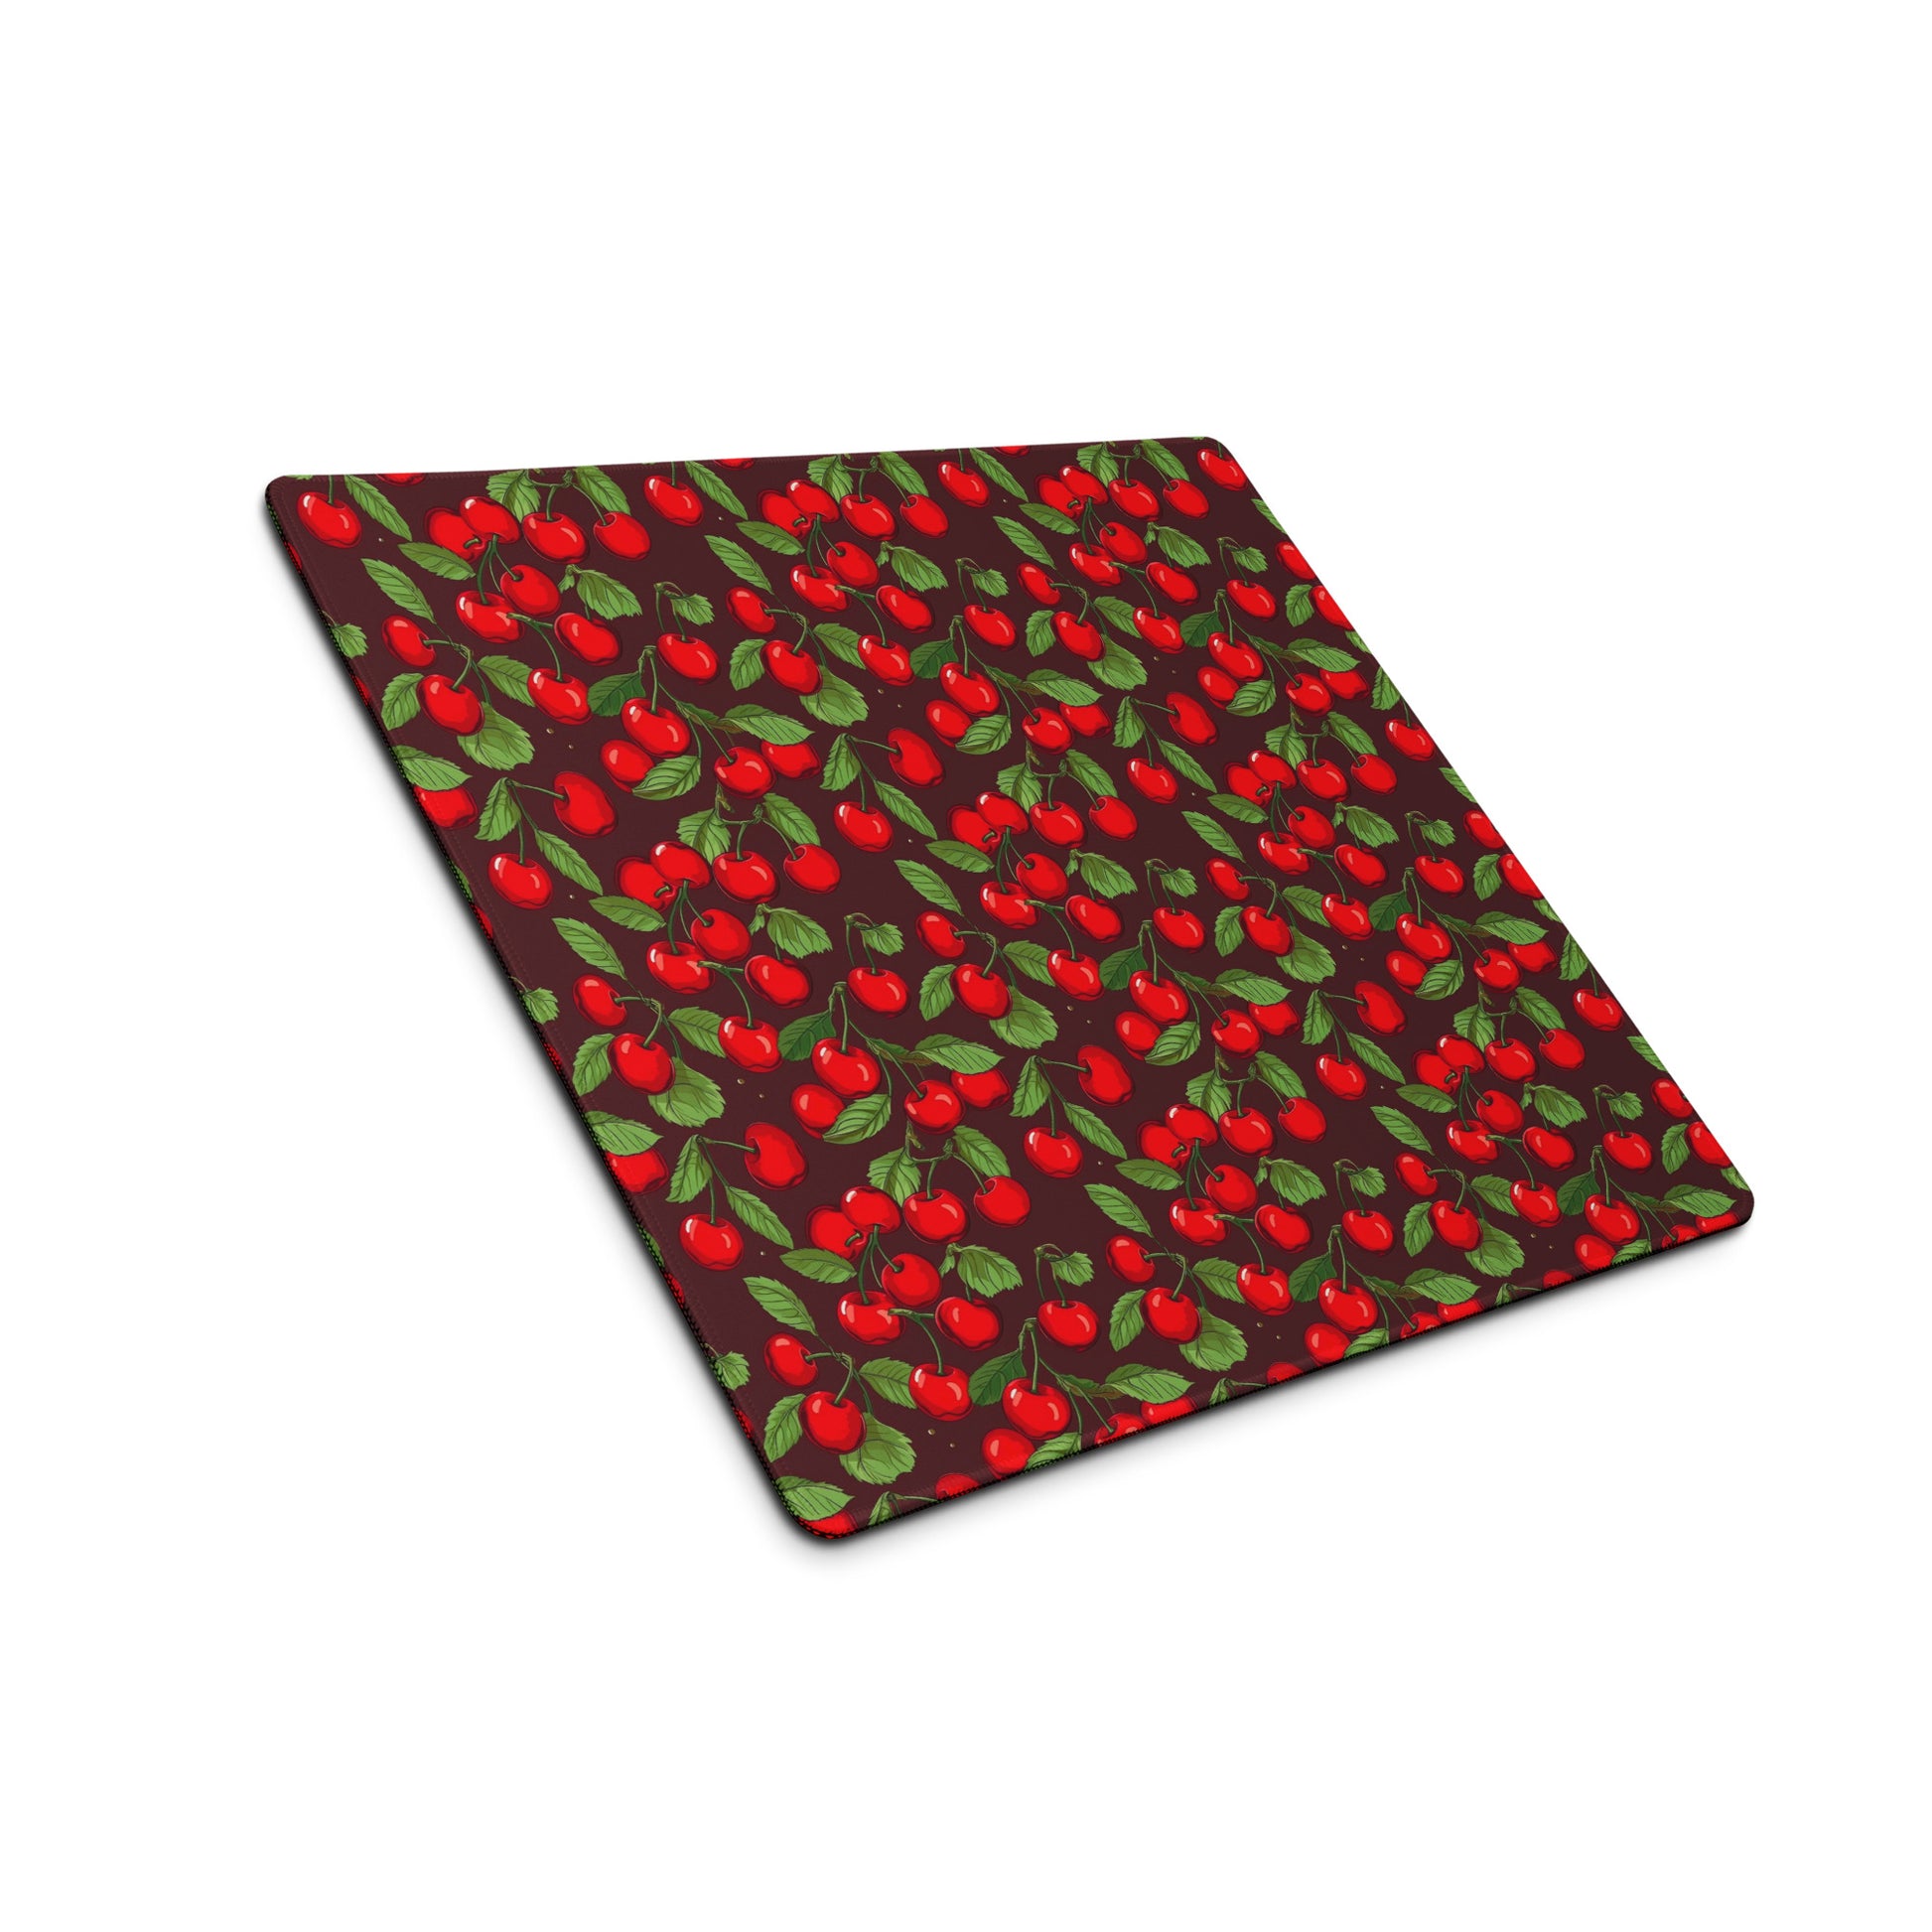 A 18" x 16" desk pad with cherries all over it shown at an angle. Red in color.